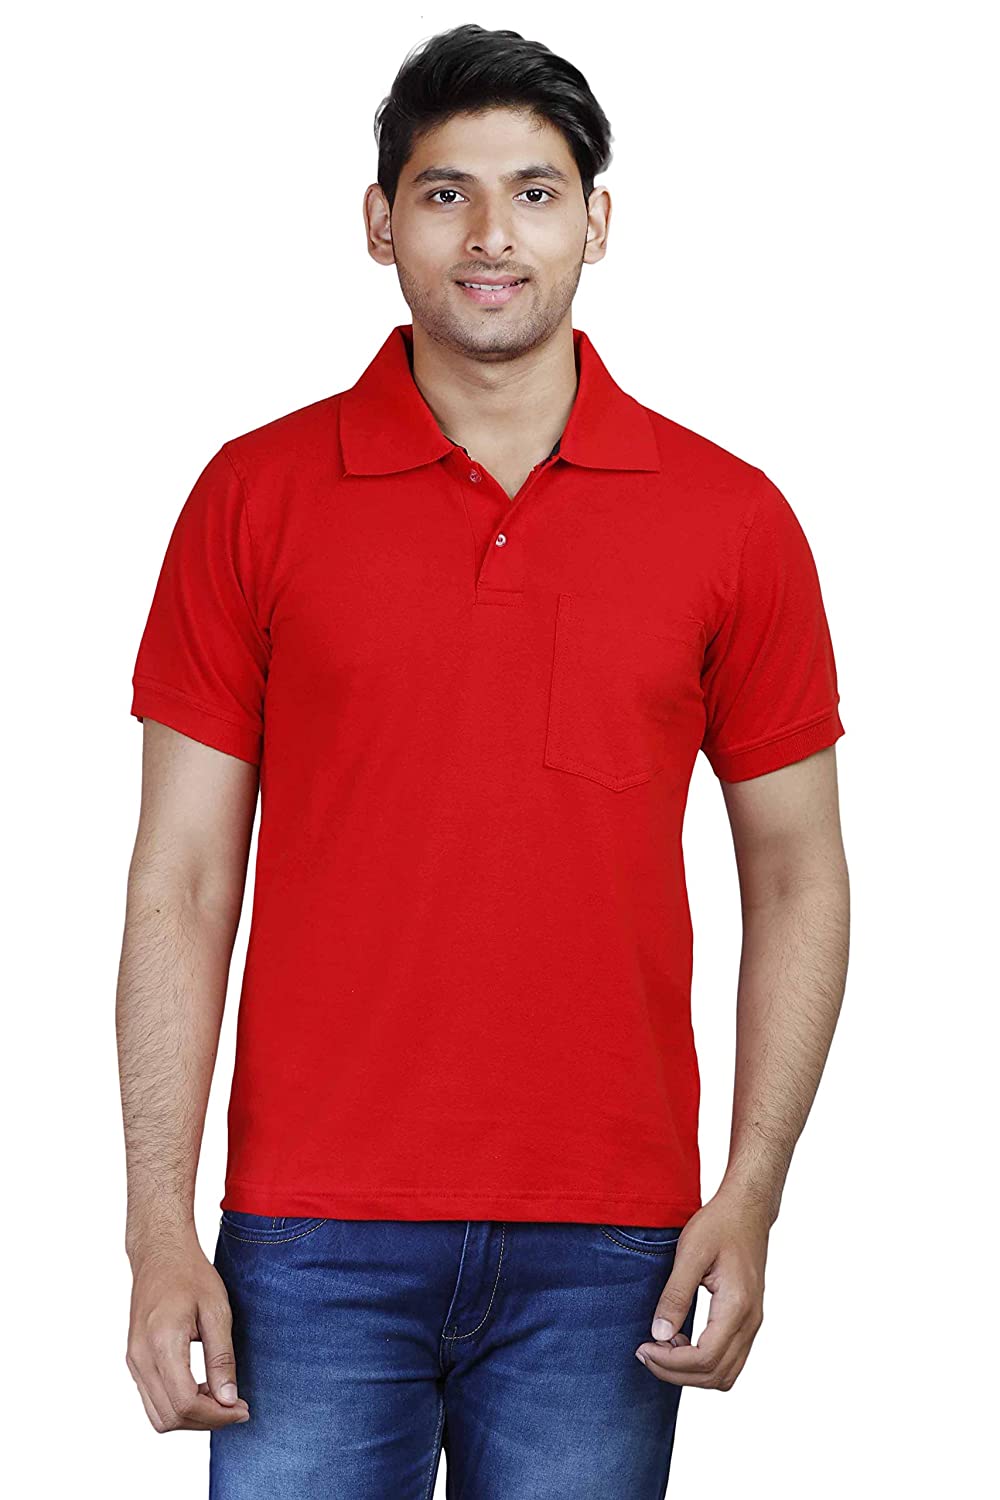 Men's Red Polo t-shirt